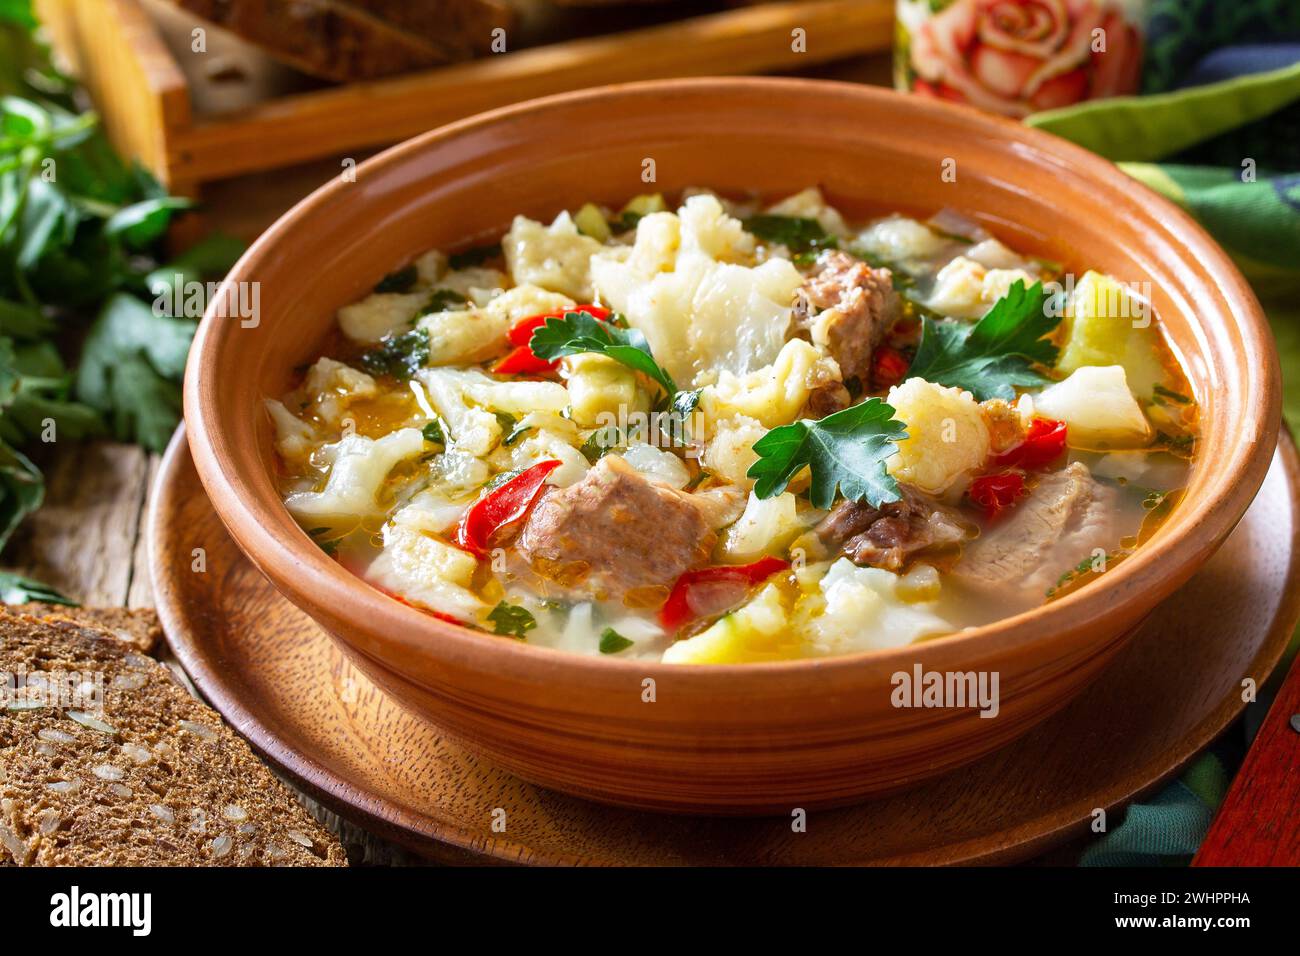 Traditional Hungarian thick soup with beef, vegetables and dumplings on a wooden table. Hot dinner or lunch. Stock Photo